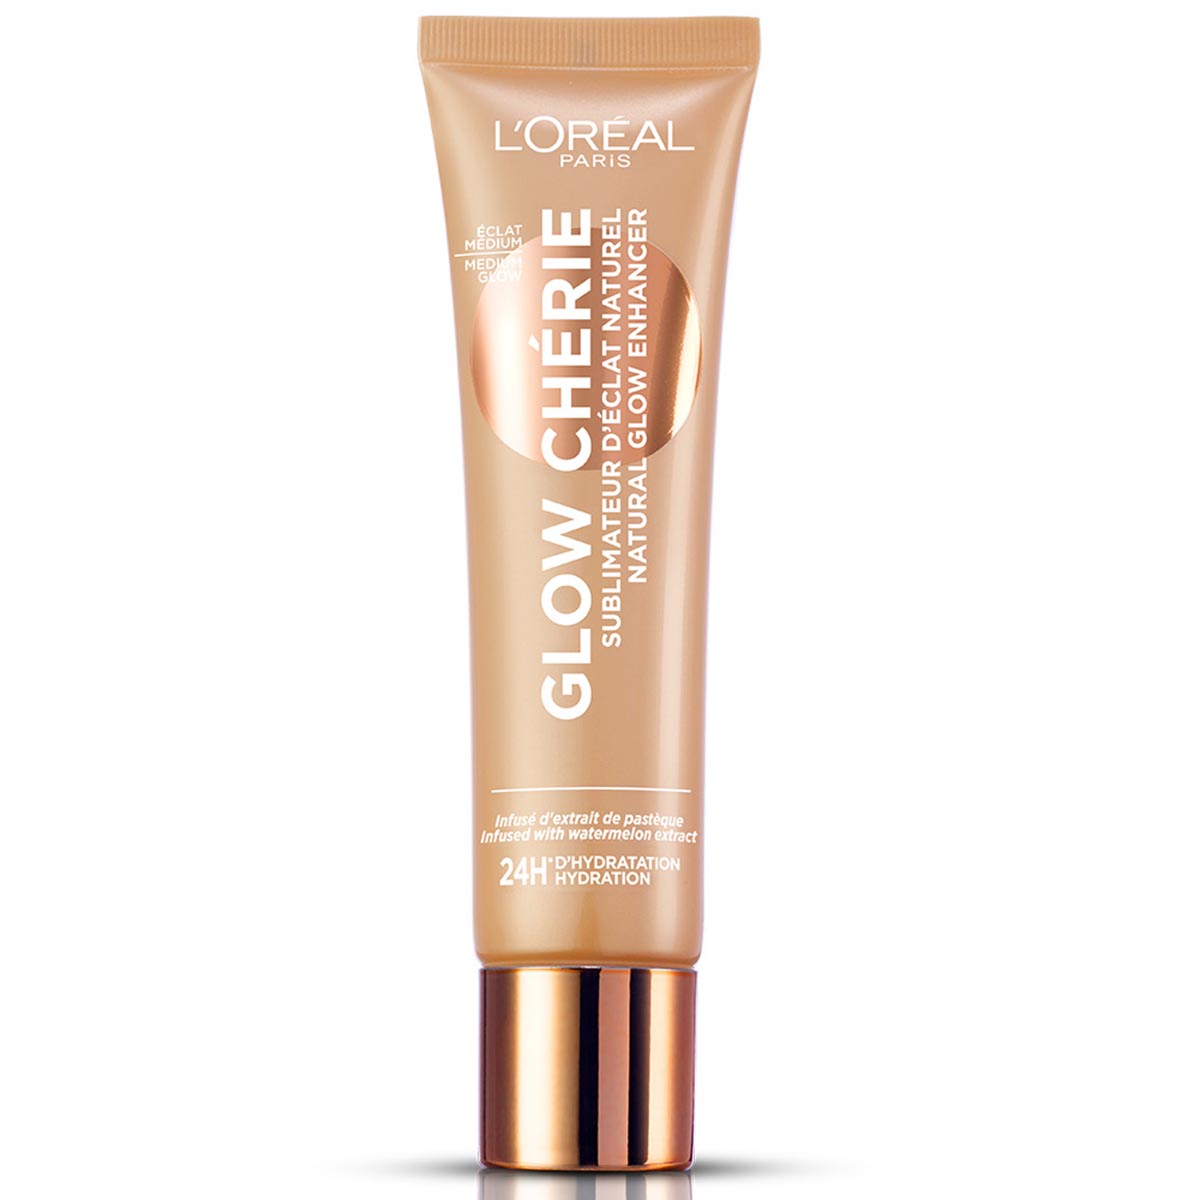 L'Oreal Glow Cherie Natural Glow Enhancer - CHOOSE YOUR SHADE-BeautyNmakeup.co.uk